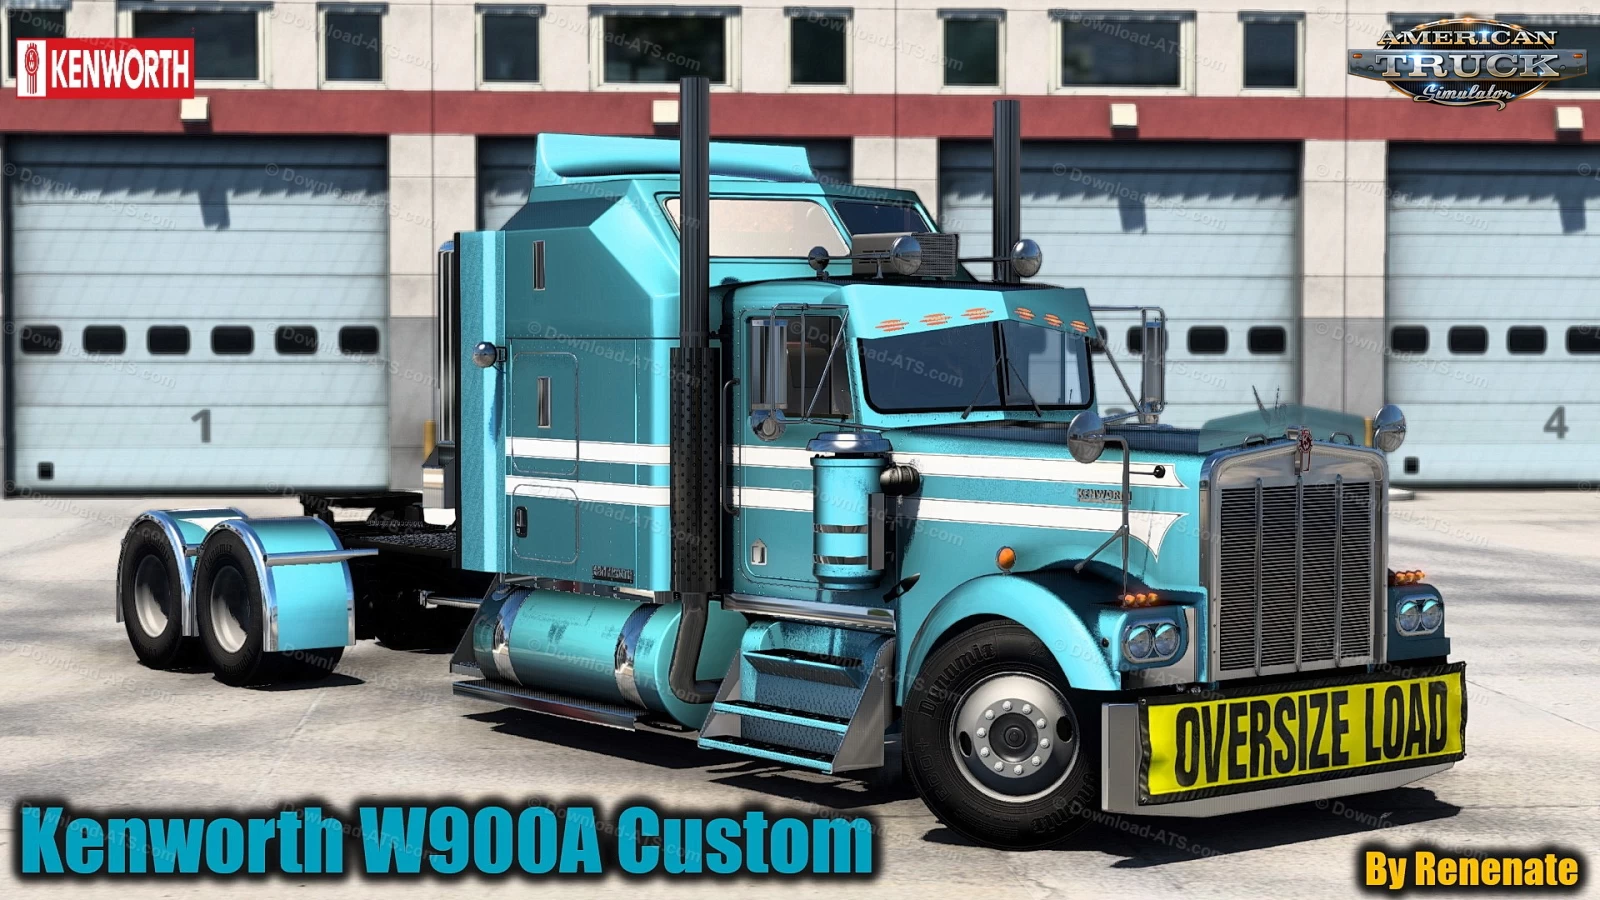 Kenworth W900A Custom Truck v1.8 by Renenate (1.48.x) for ATS